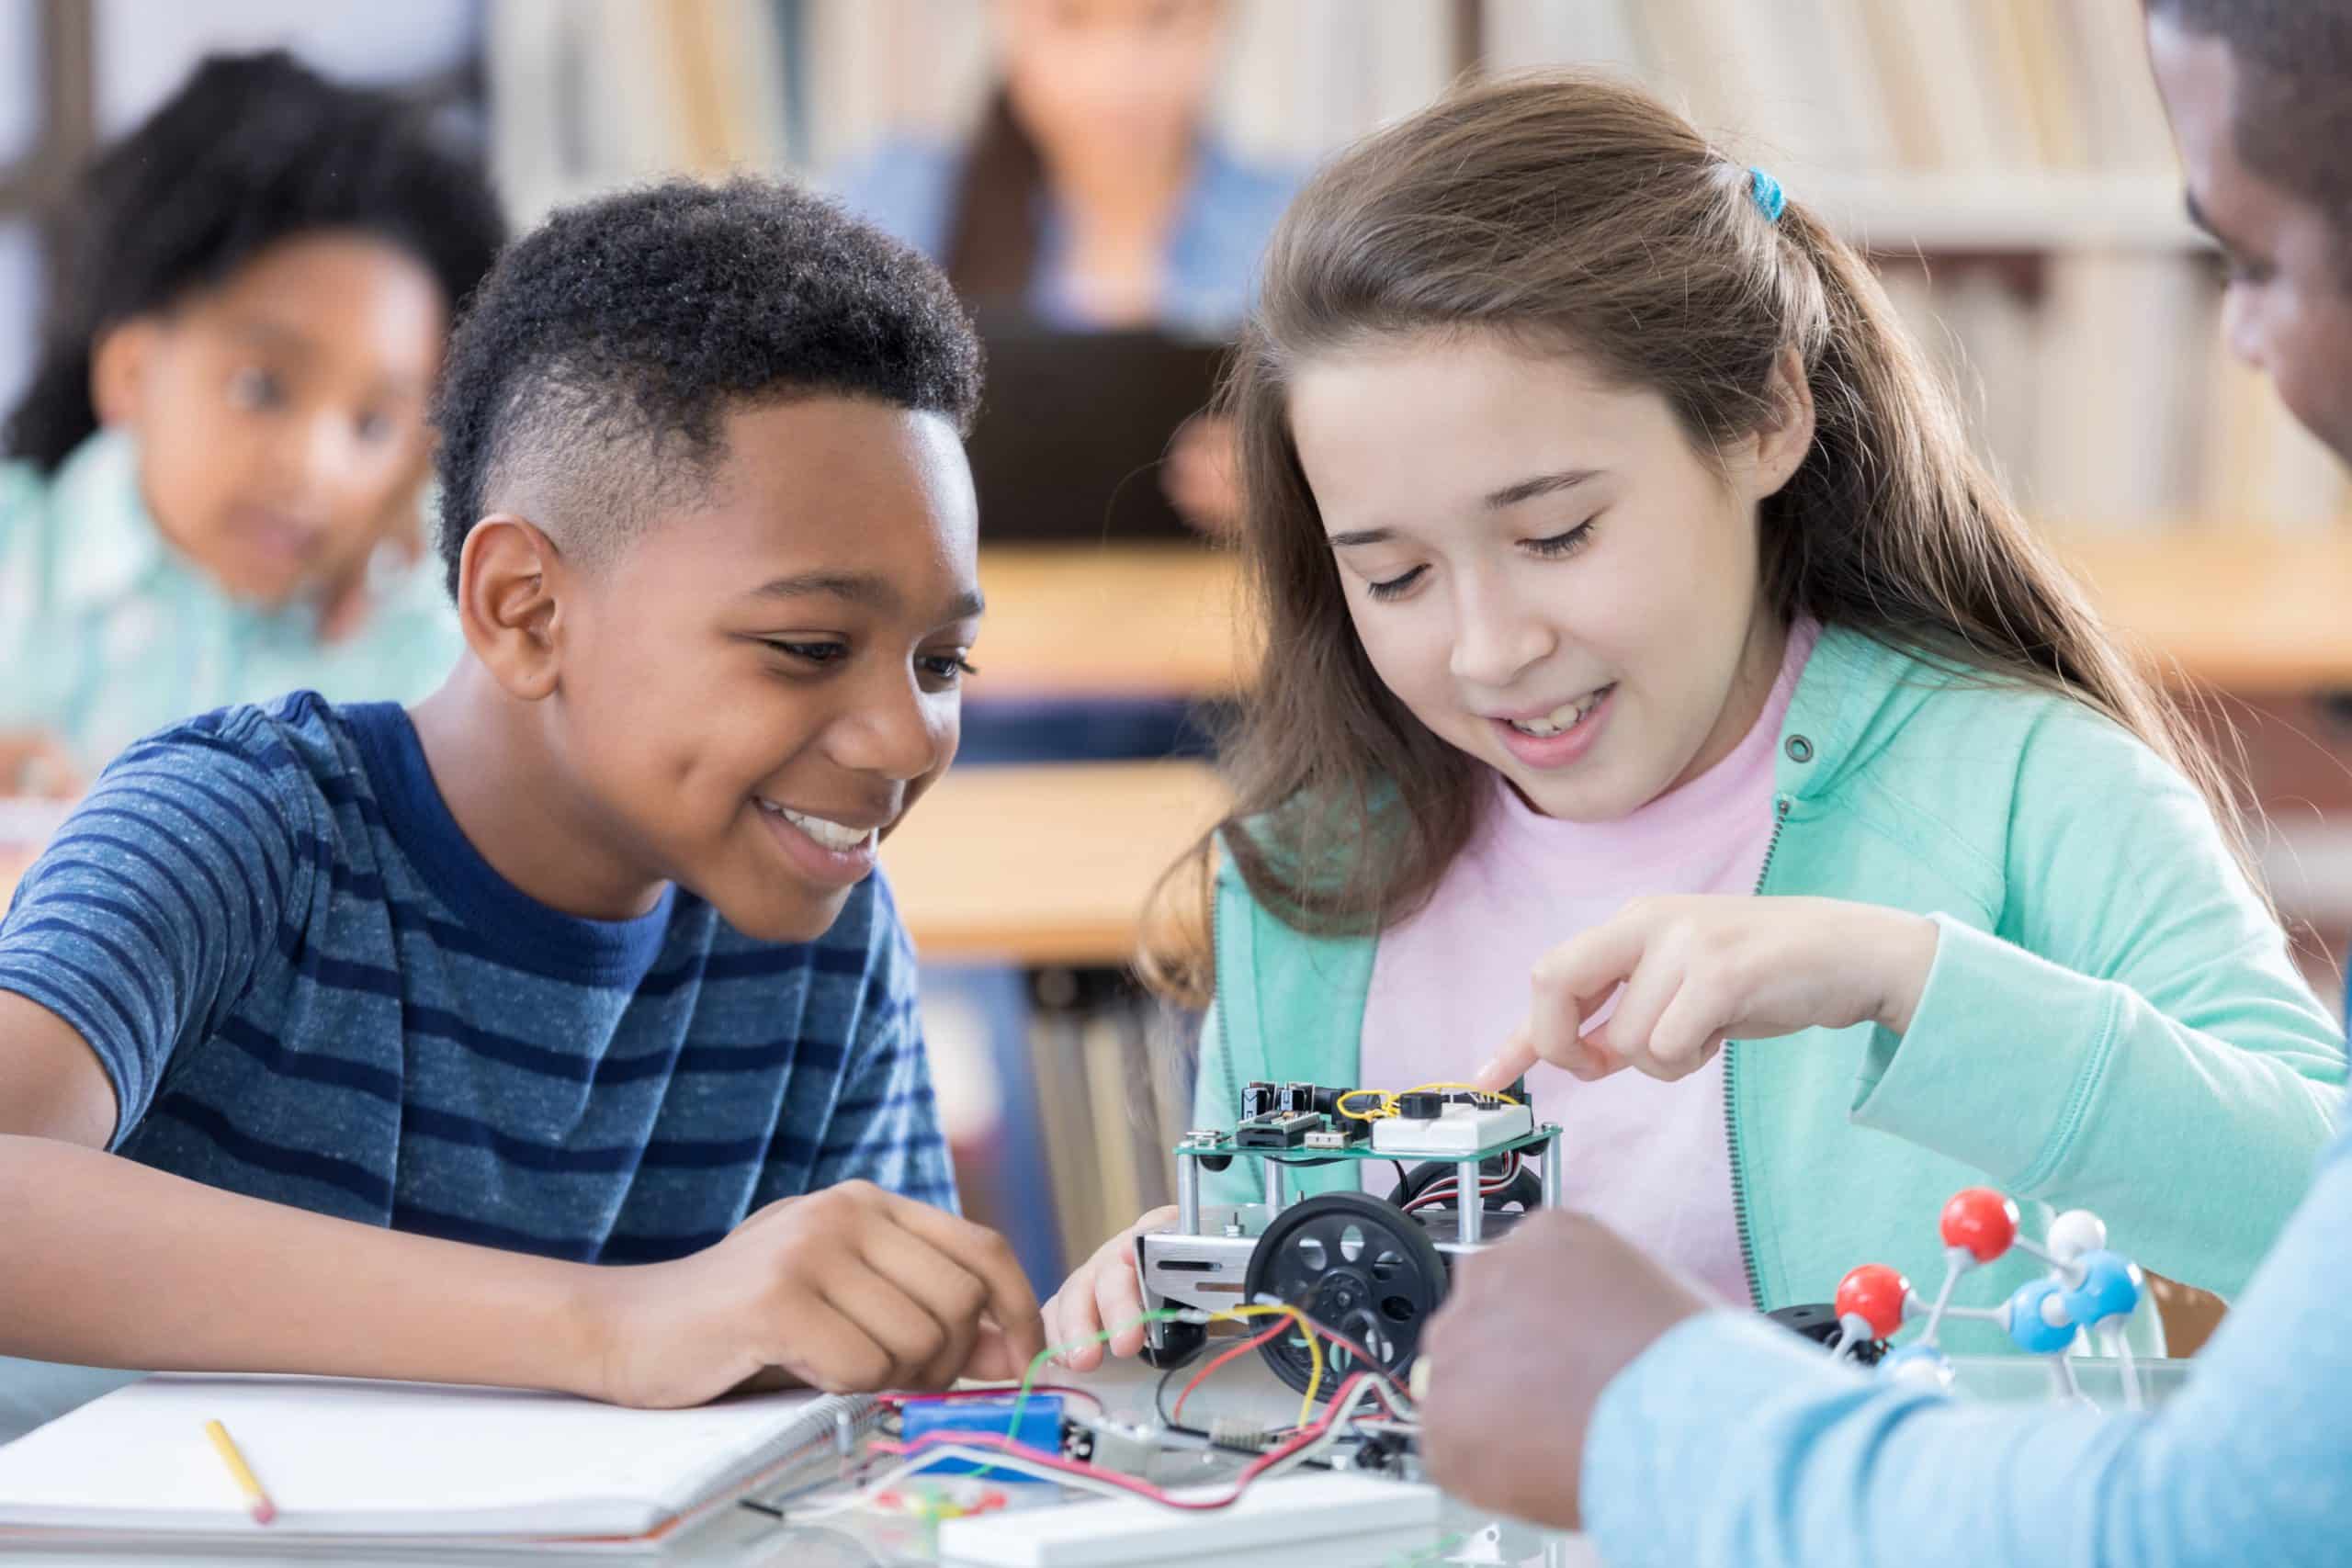 65% of today’s 2nd graders will work in jobs that don’t exist today